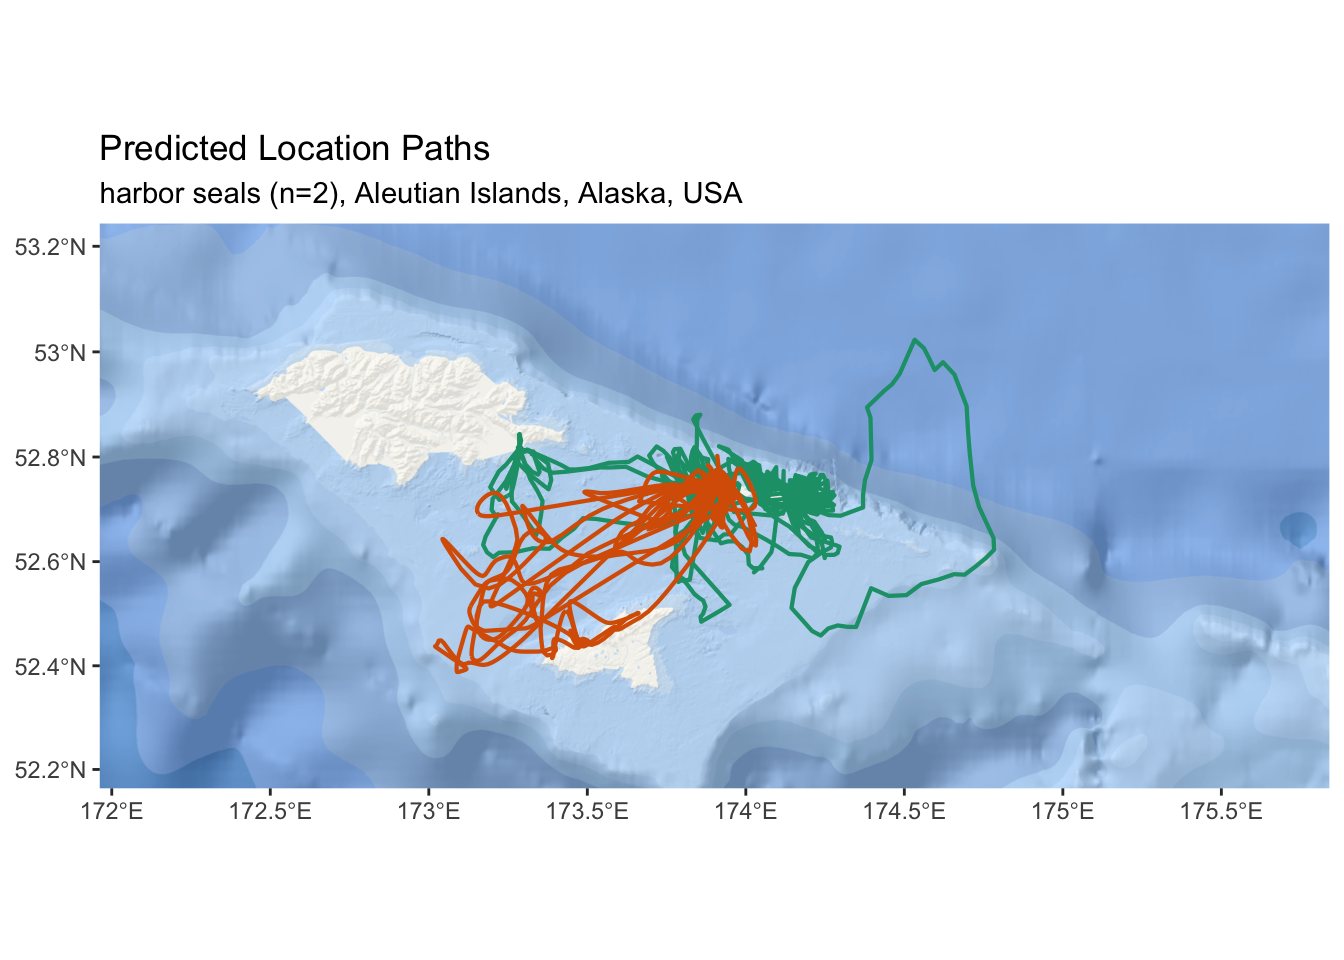 An interactive map of predicted tracks from two harbor seals in the Aleutian Islands.